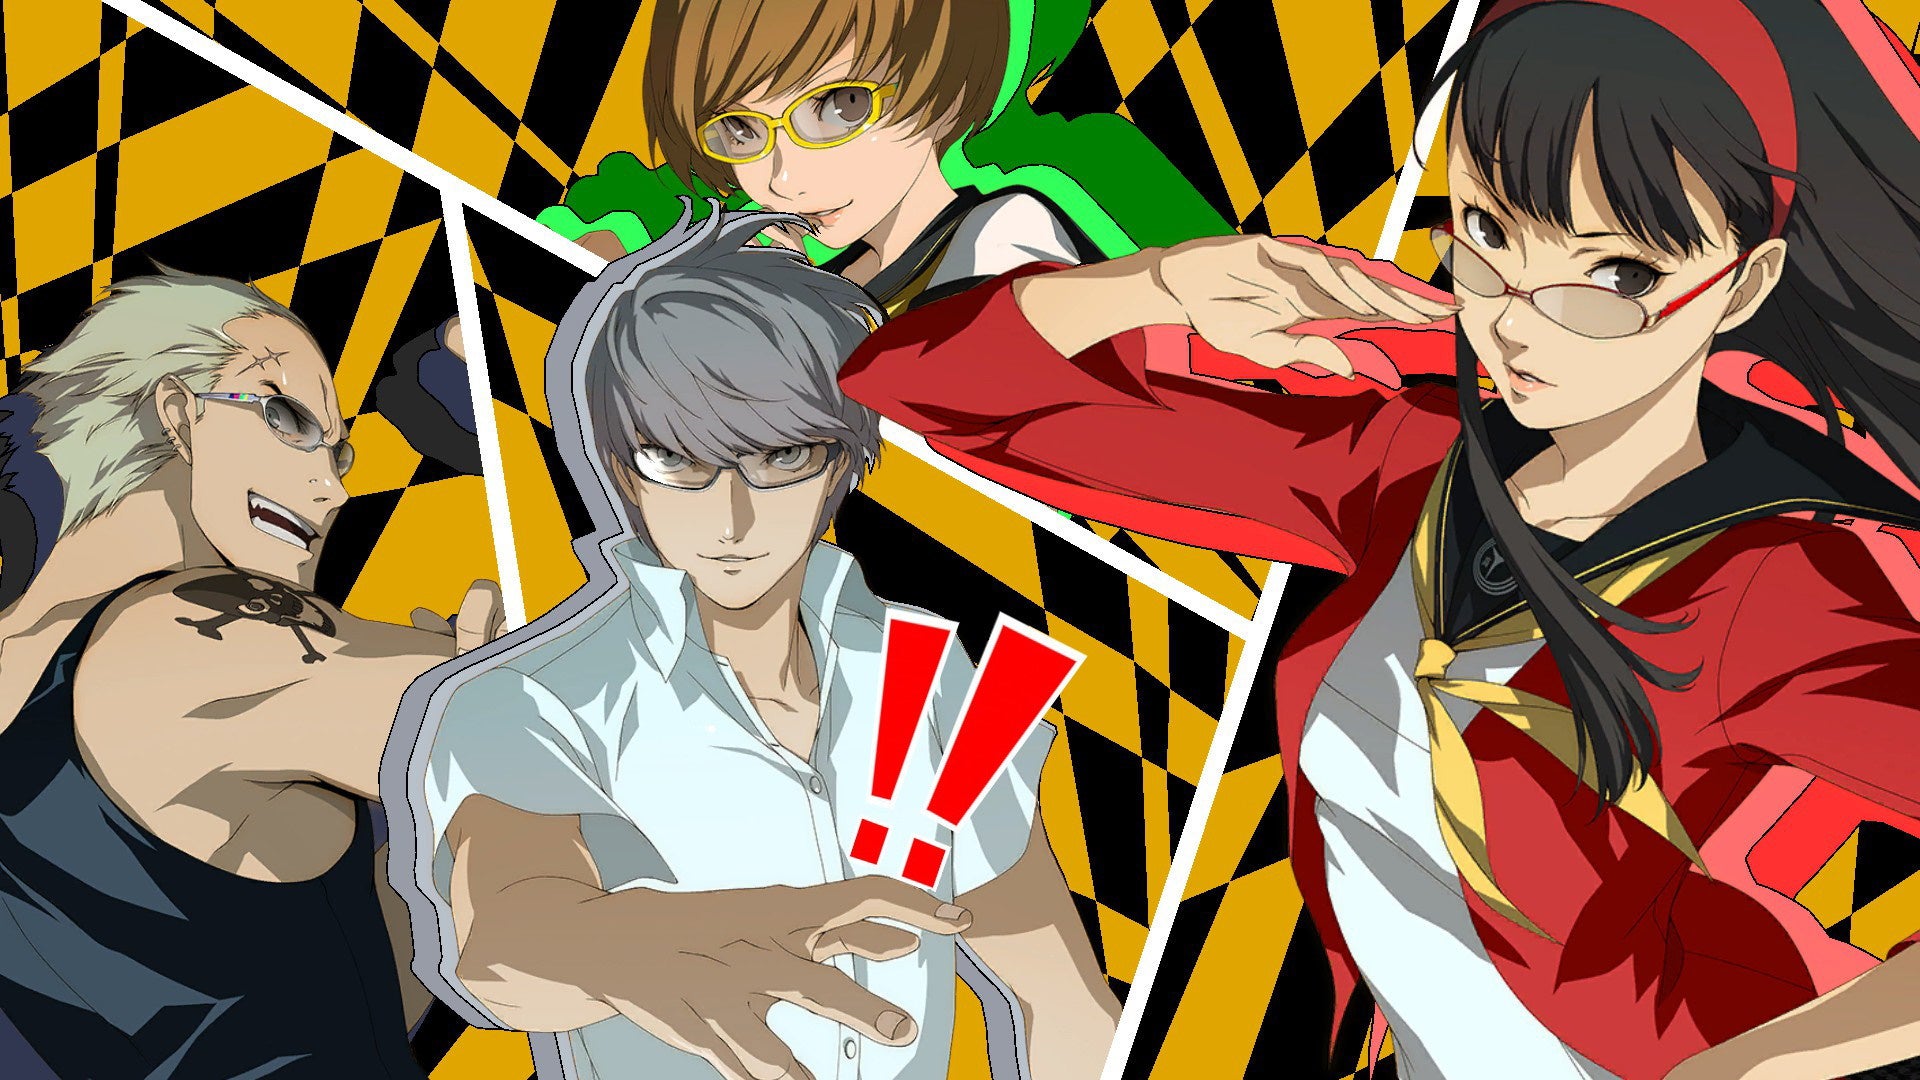 Image for Persona 4 Golden test answers, including how to ace all exams and class quiz questions